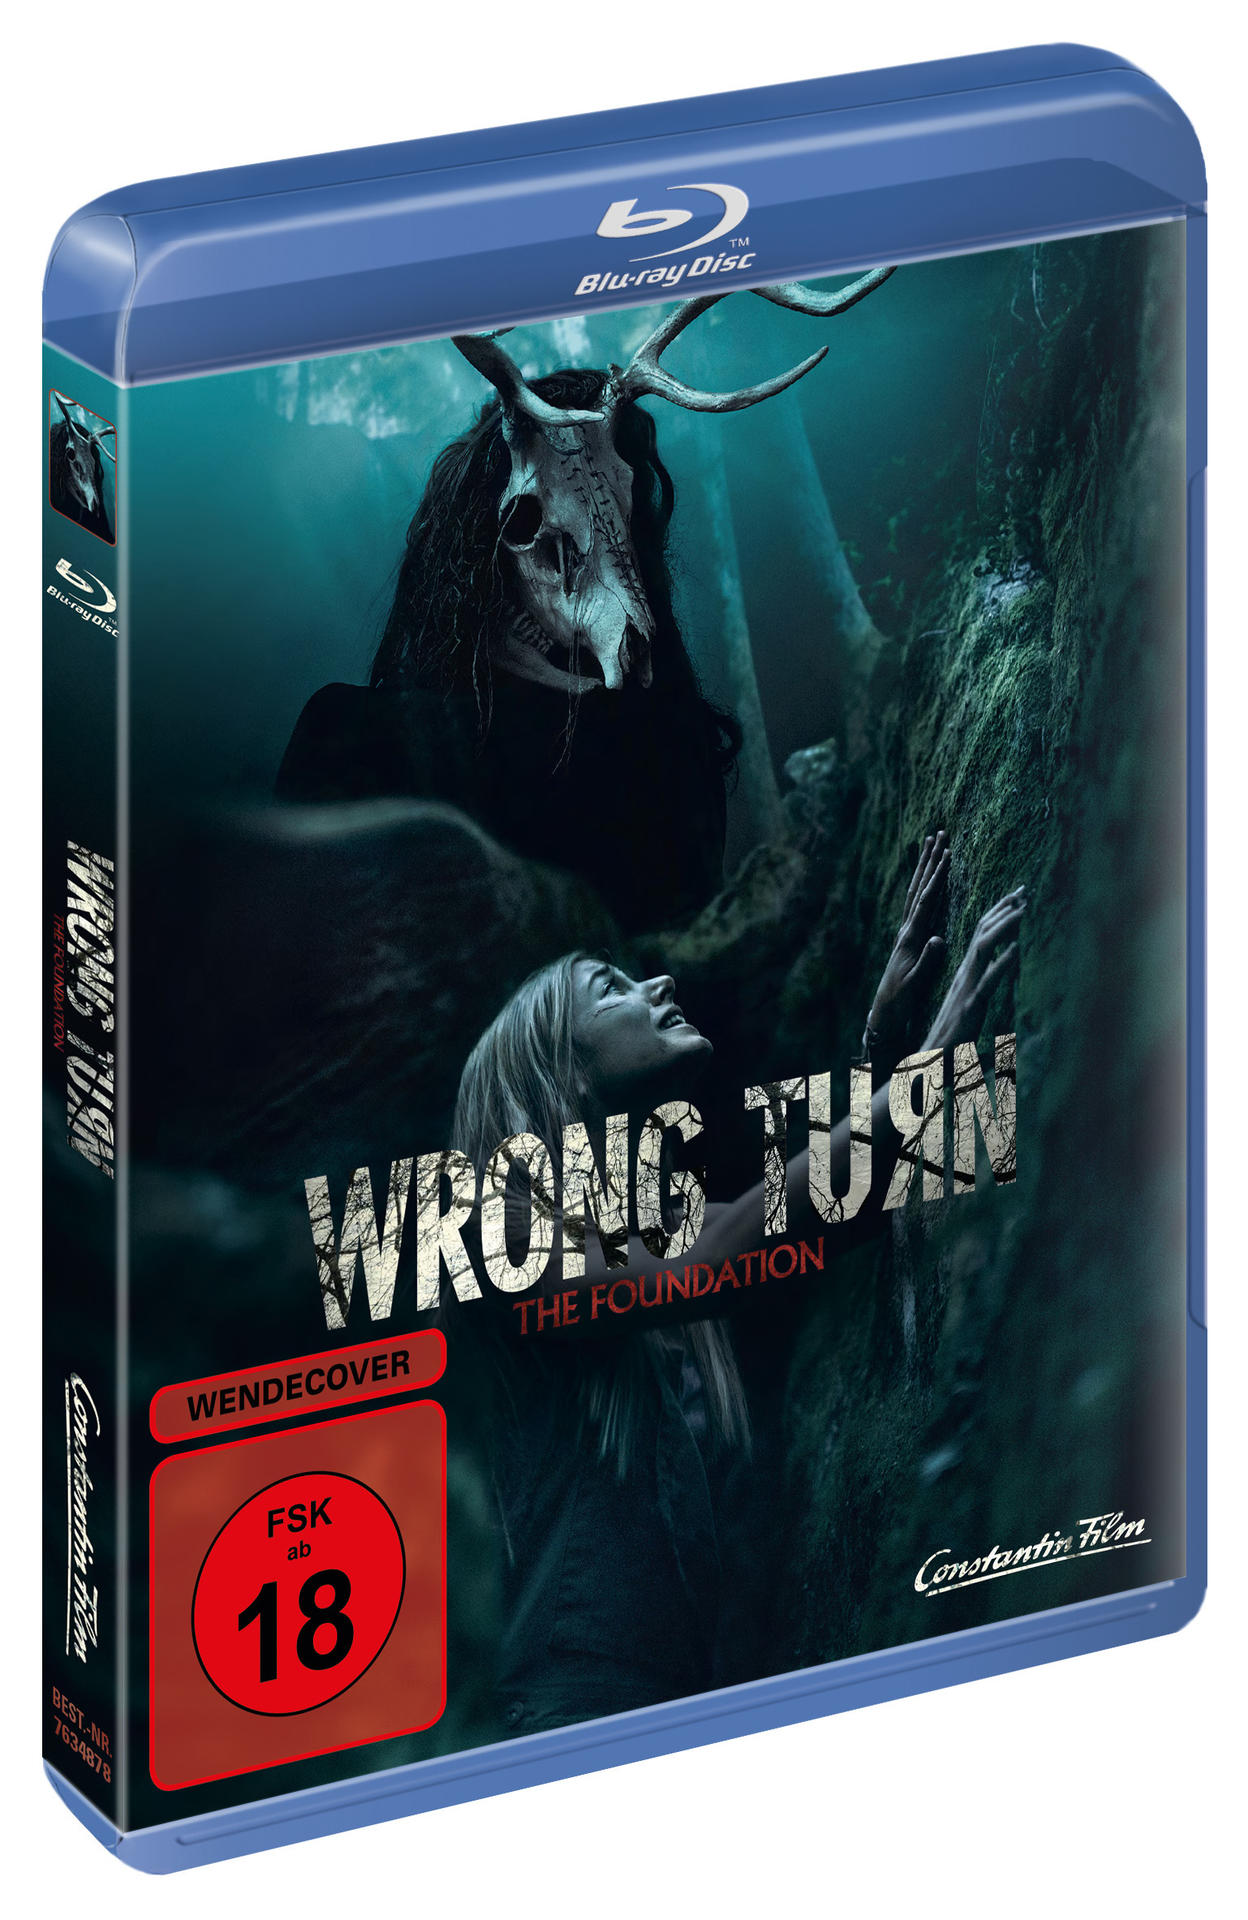 Foundation Turn Blu-ray Wrong The -